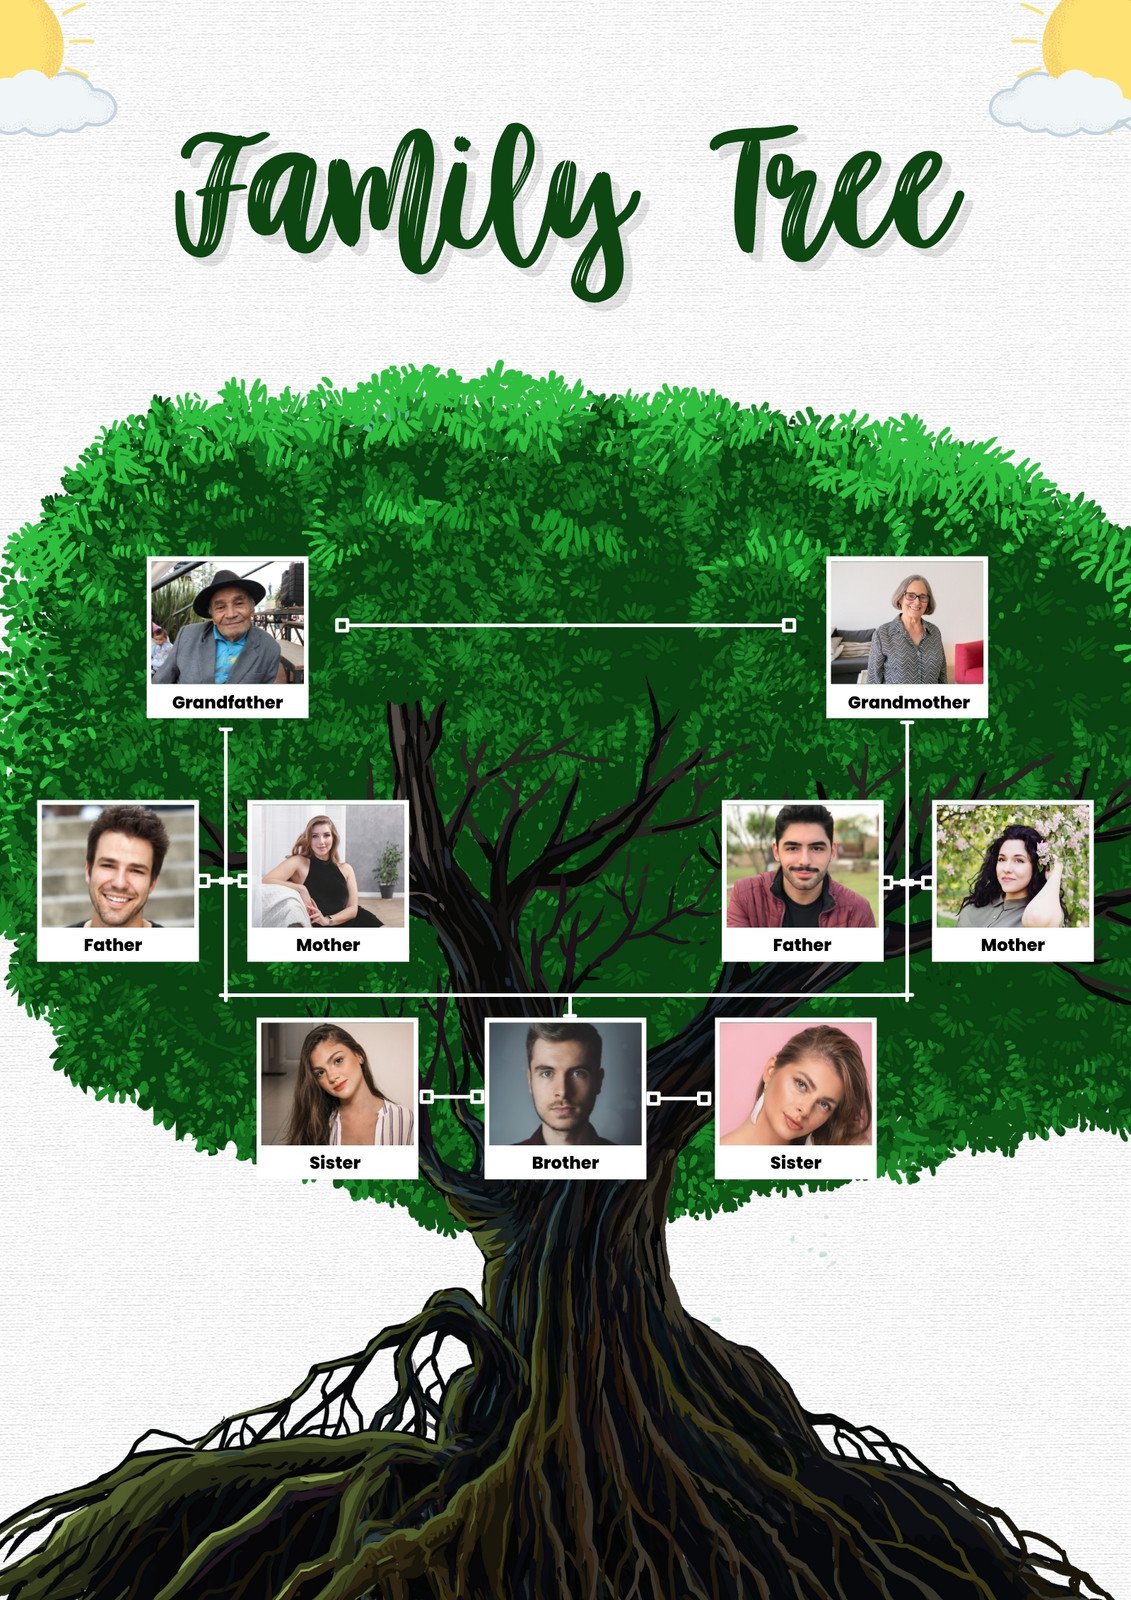 Ancestry Family Tree [Free Template]